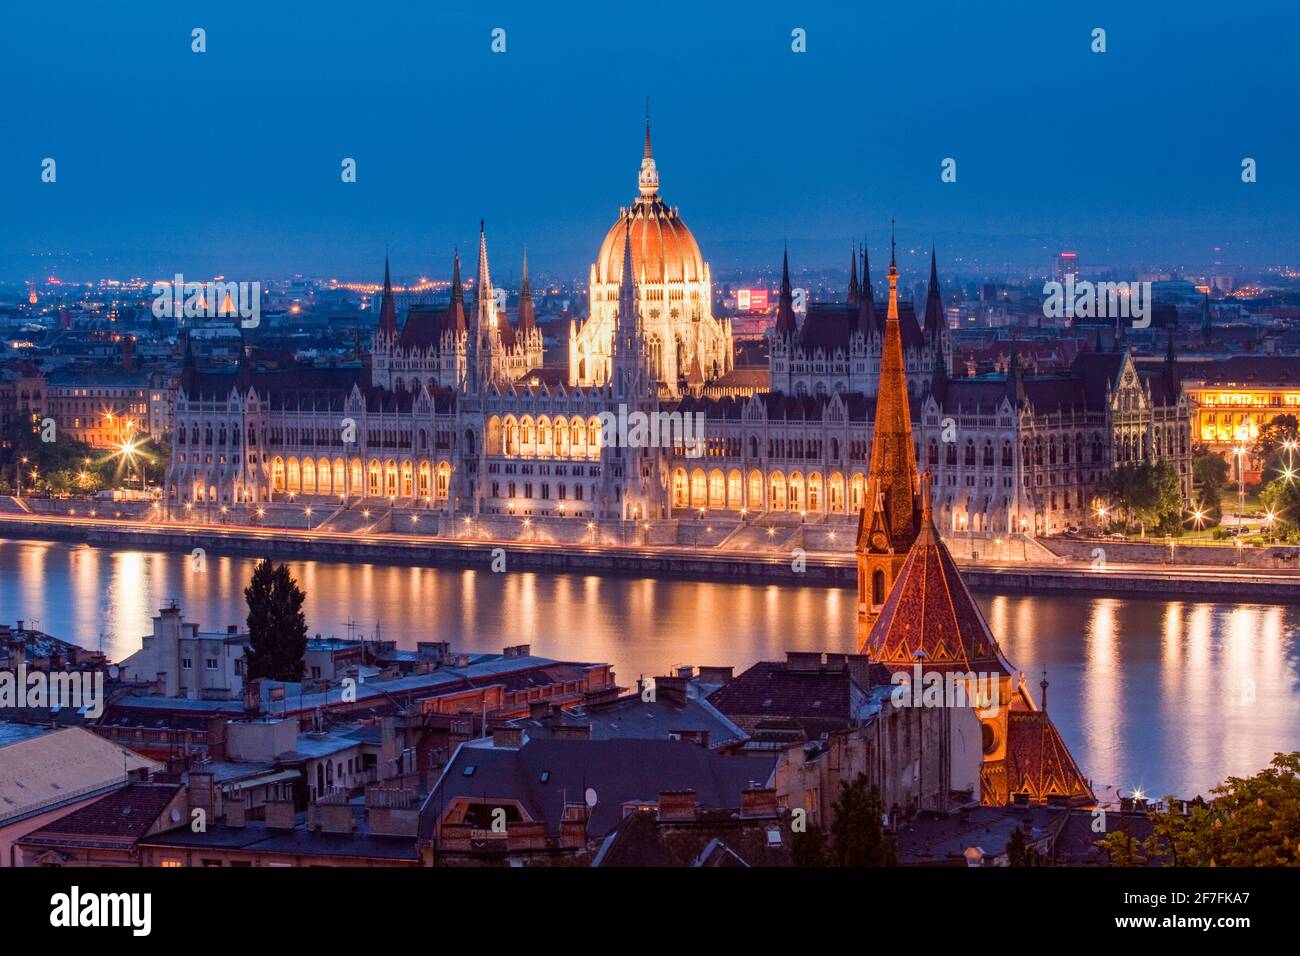 The Hungarian Parliament Building and River Danube at night, UNESCO World Heritage Site, Budapest, Hungary, Europe Stock Photo